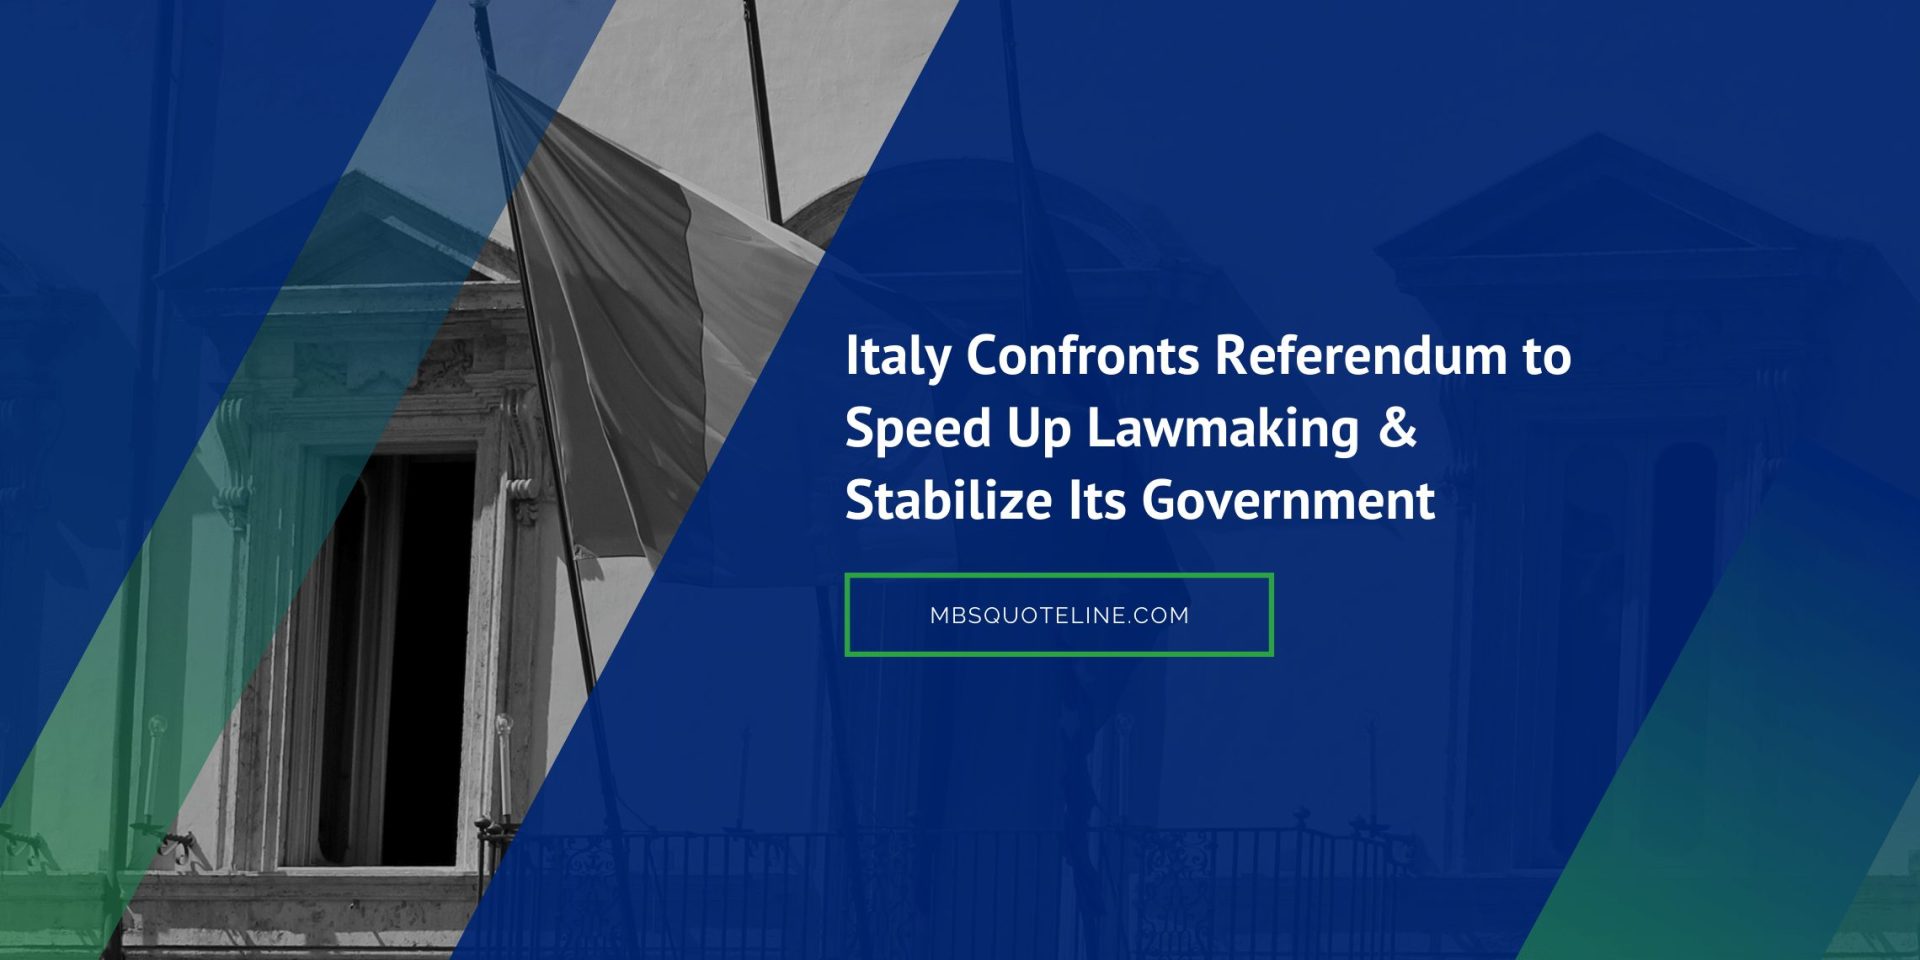 italy confronts referendum to speed up lawmaking stabilize its government news mbsquoteline